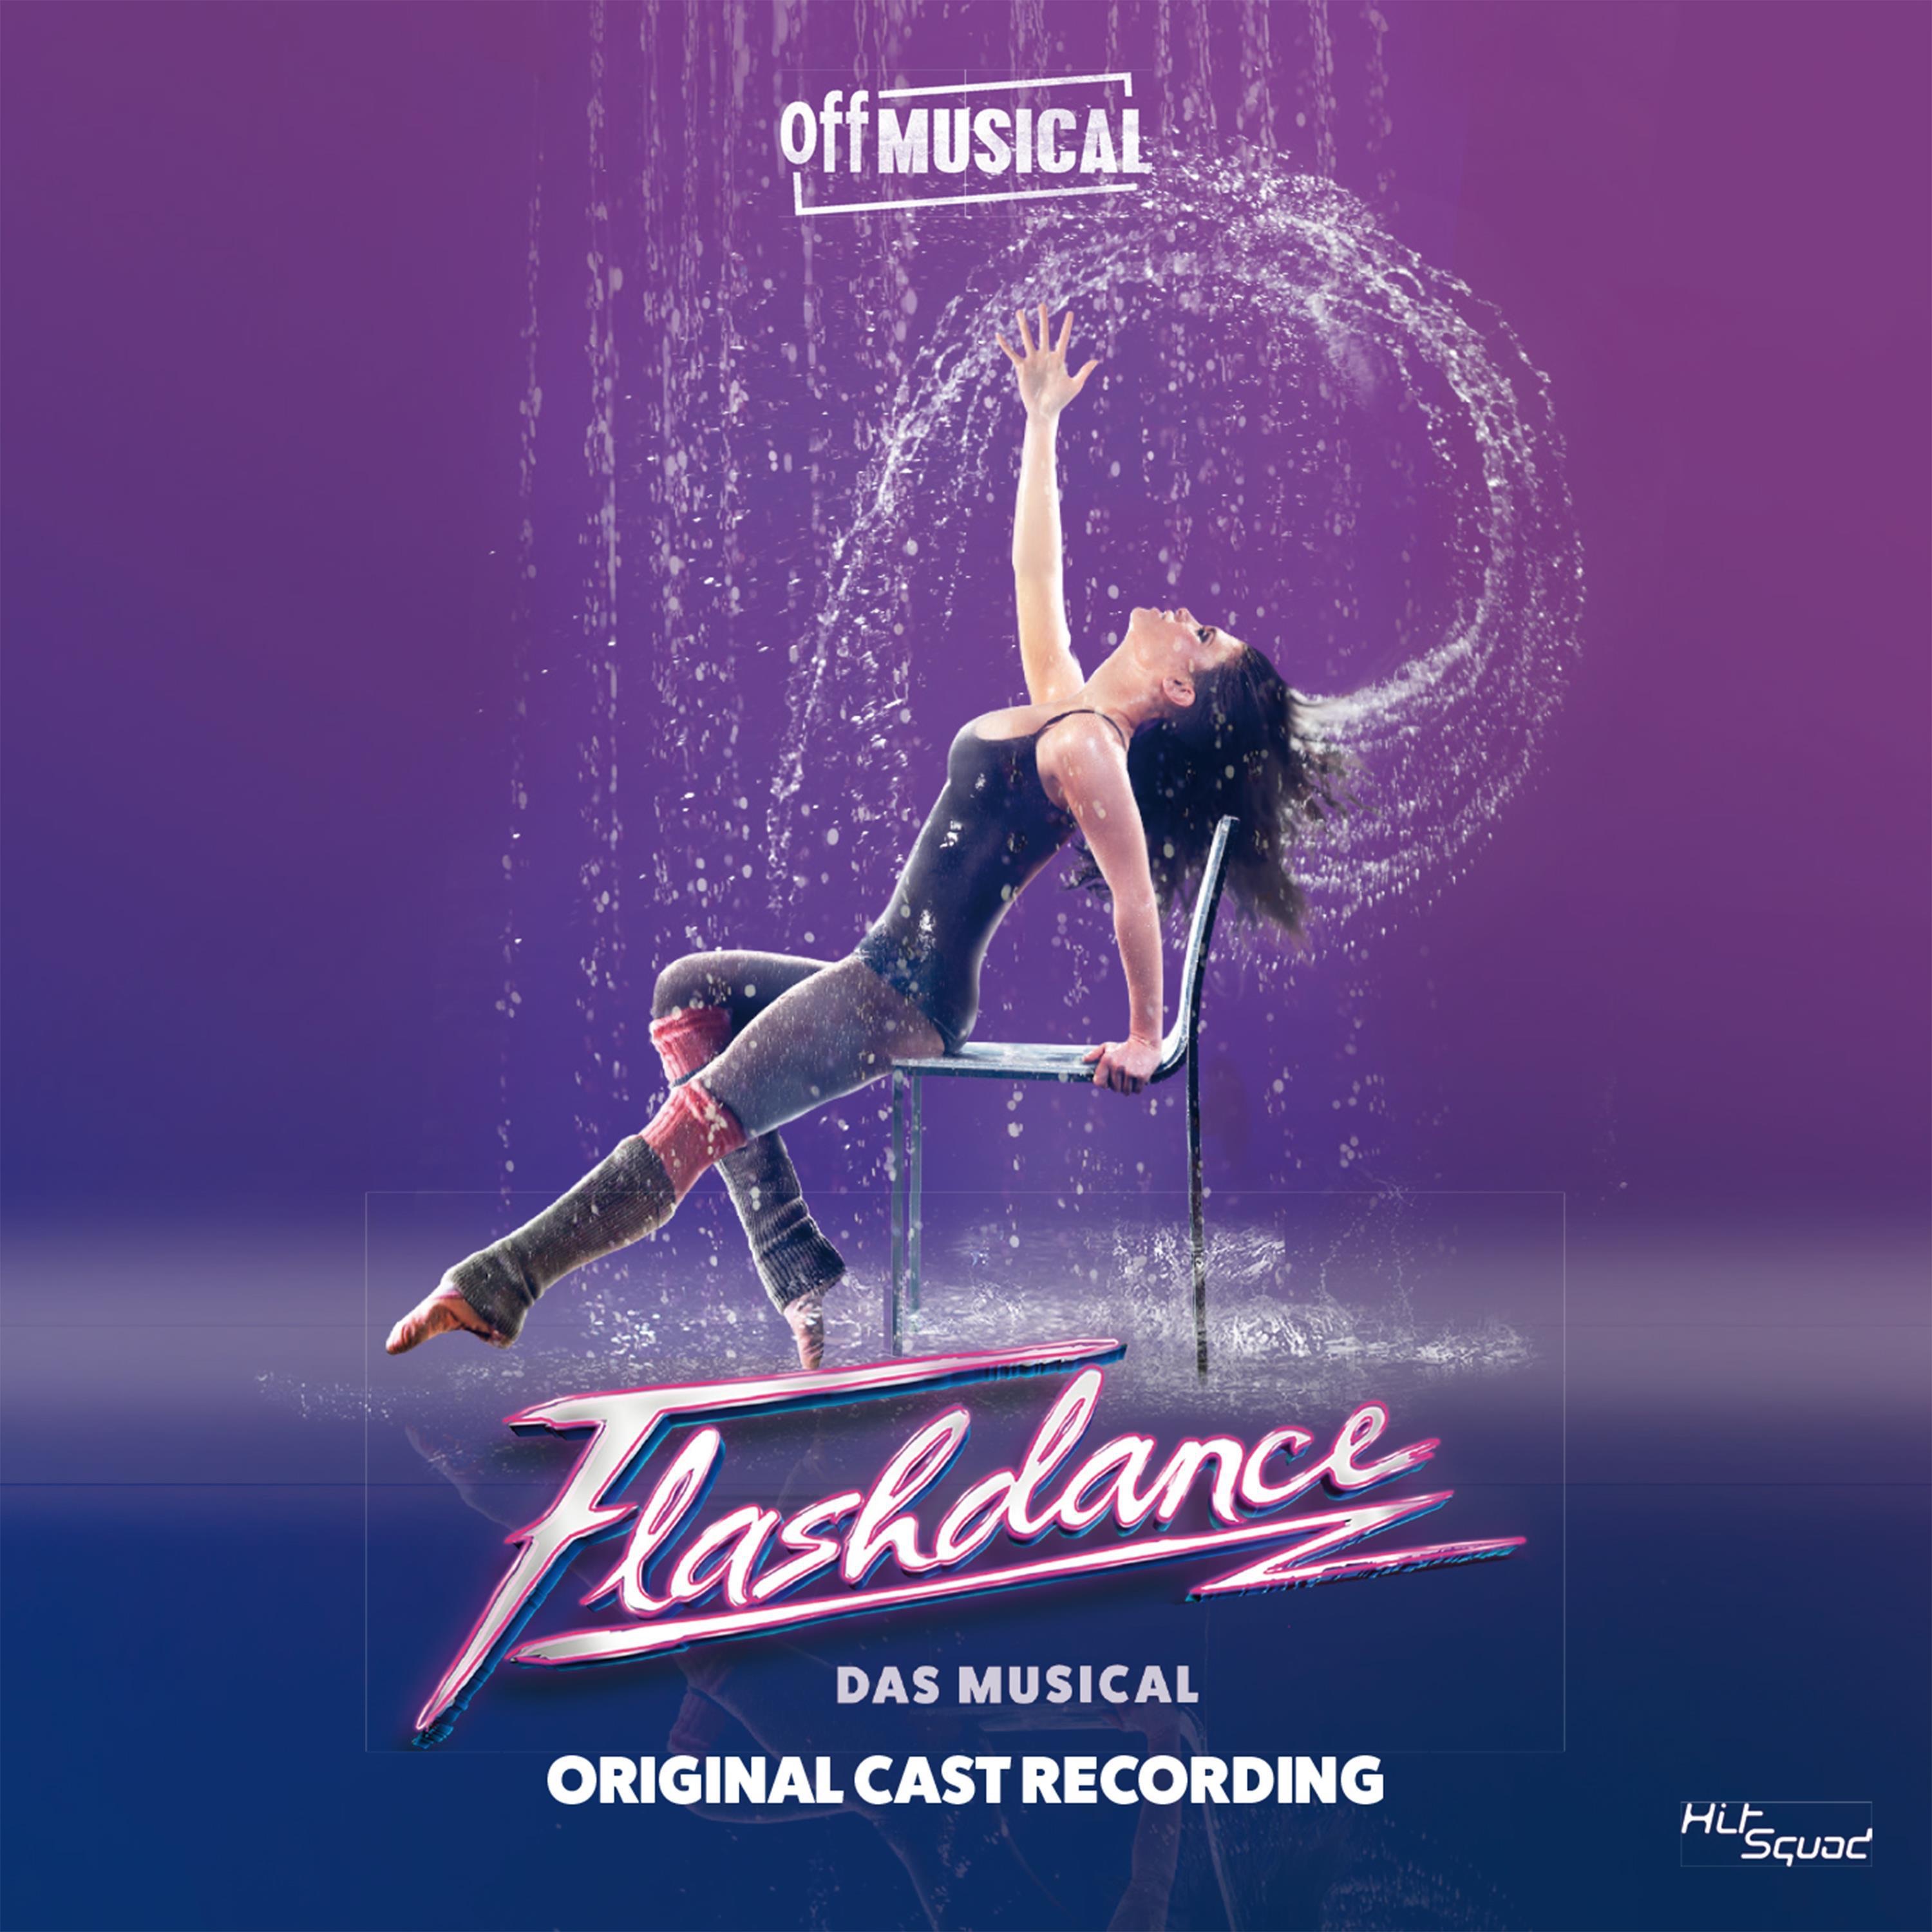 Flashdance набор музыки. Flashdance poster. Flashdance - Original Soundtrack from the Motion picture.